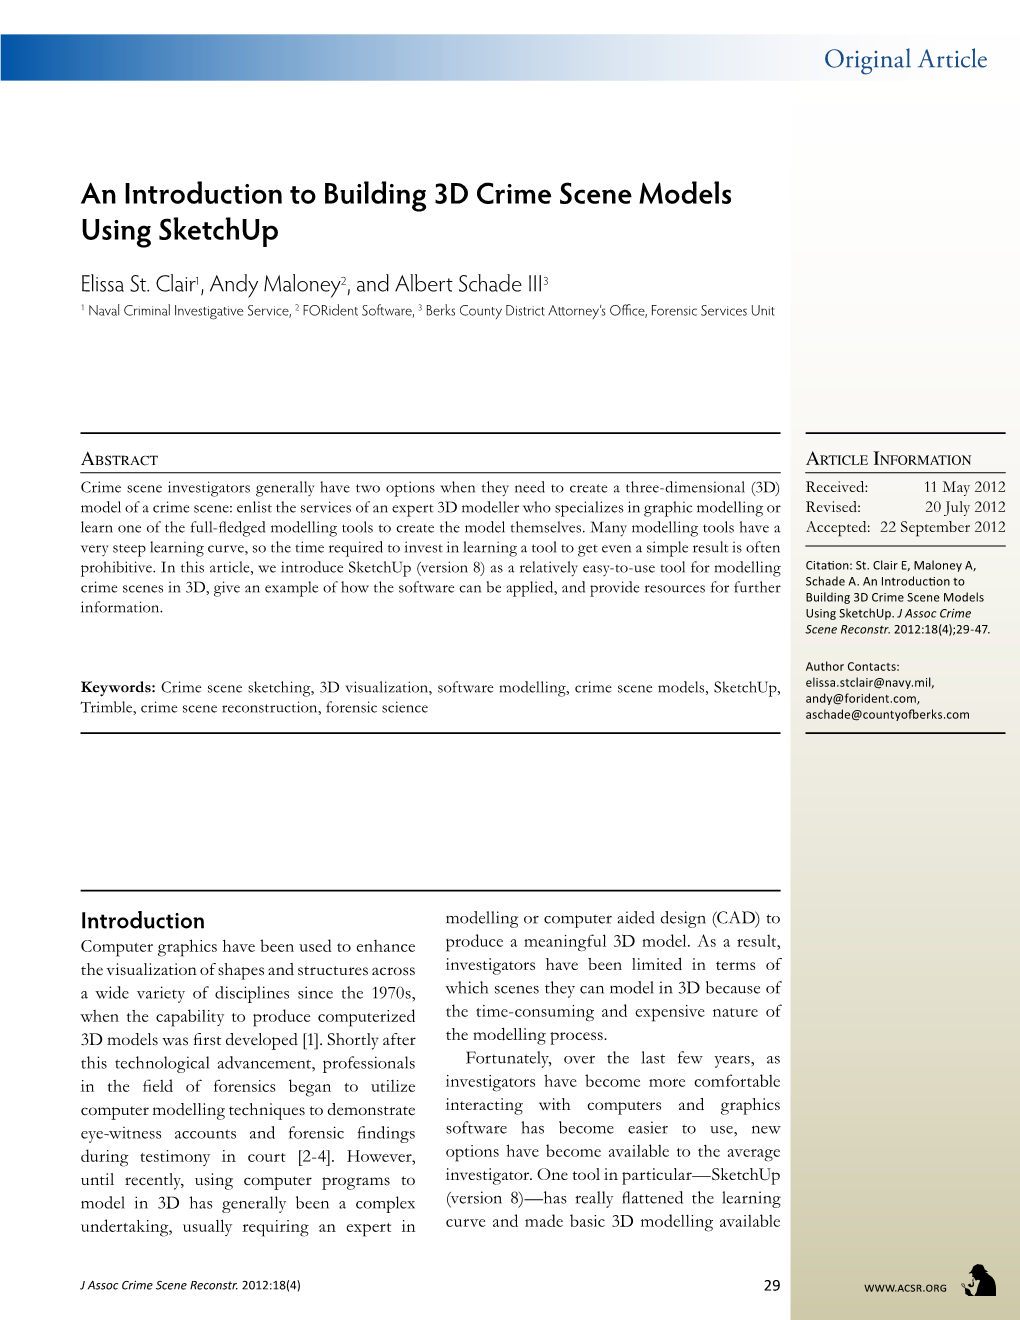 An Introduction to Building 3D Crime Scene Models Using Sketchup